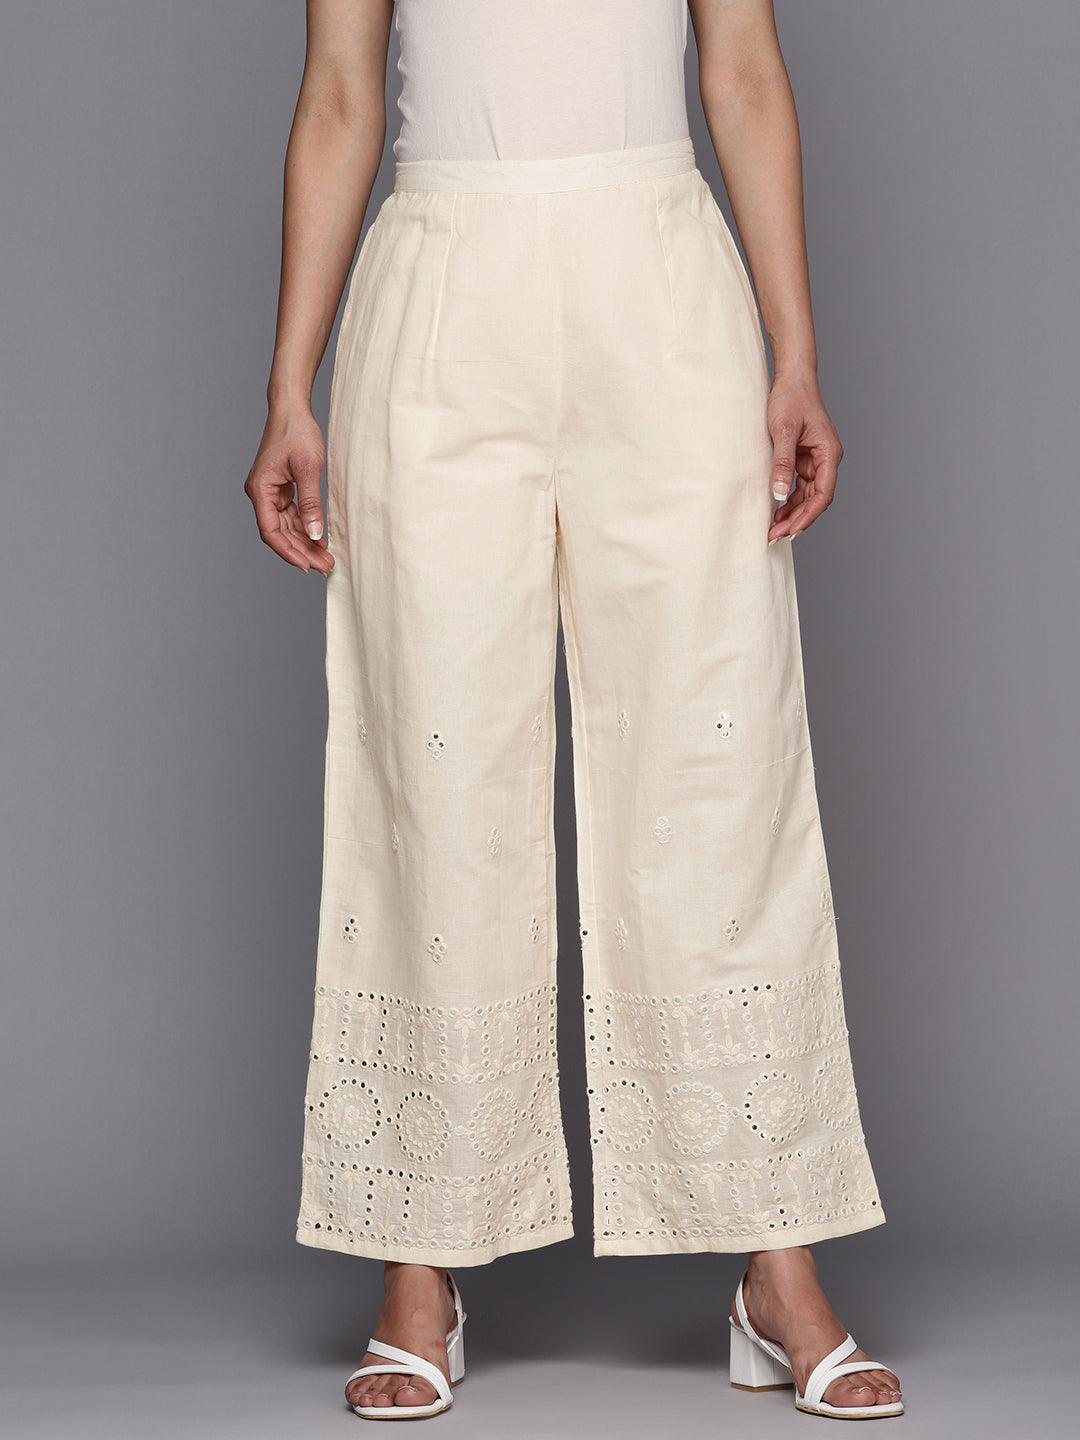 Off White Embroidered Cotton Palazzos